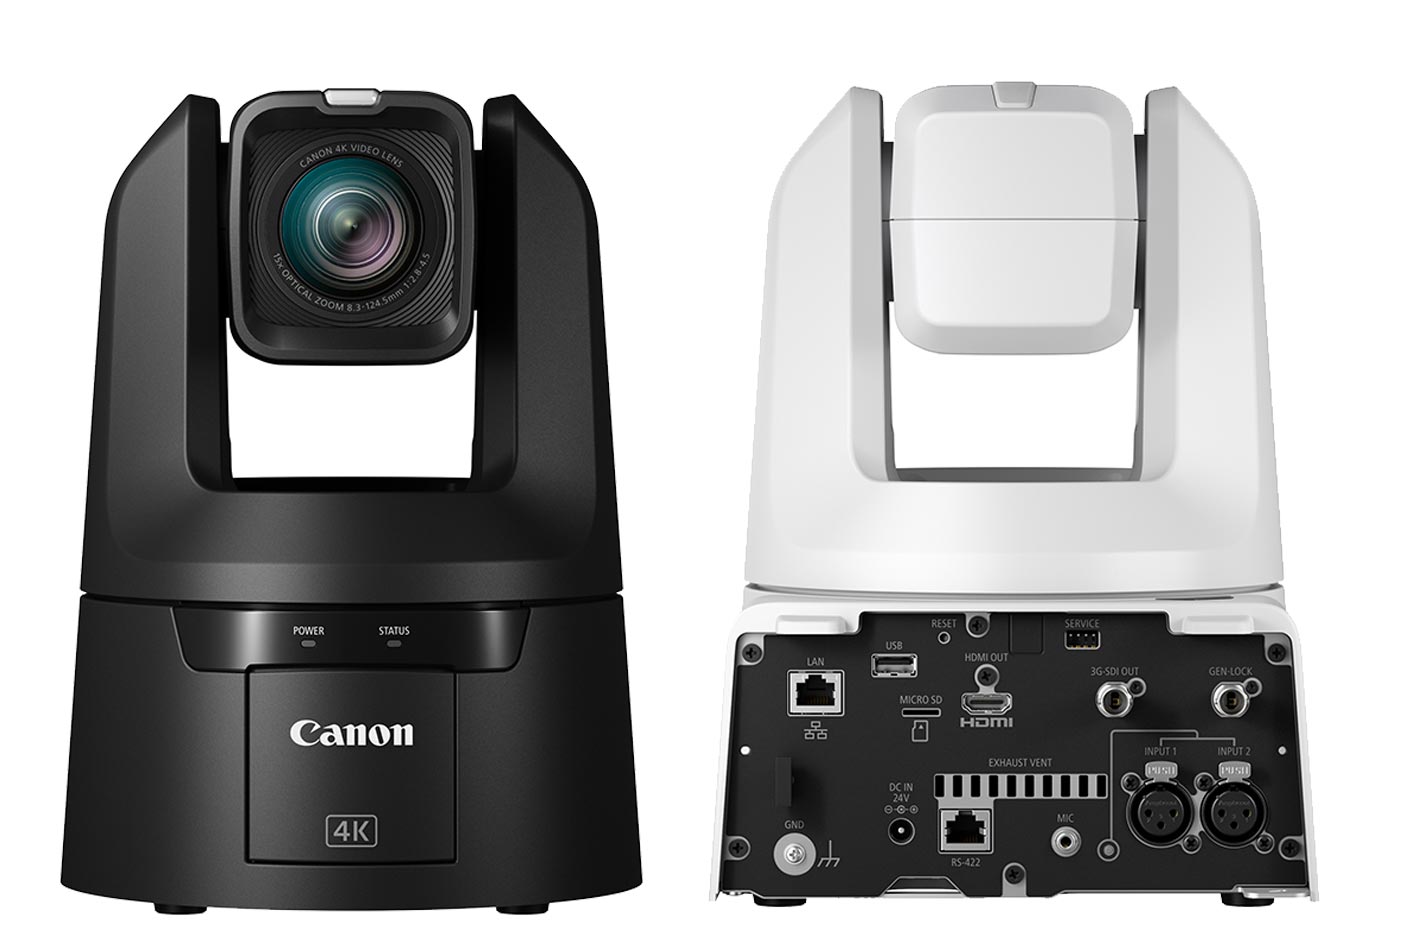 Canon’s first line of 4K UHD PTZ cameras